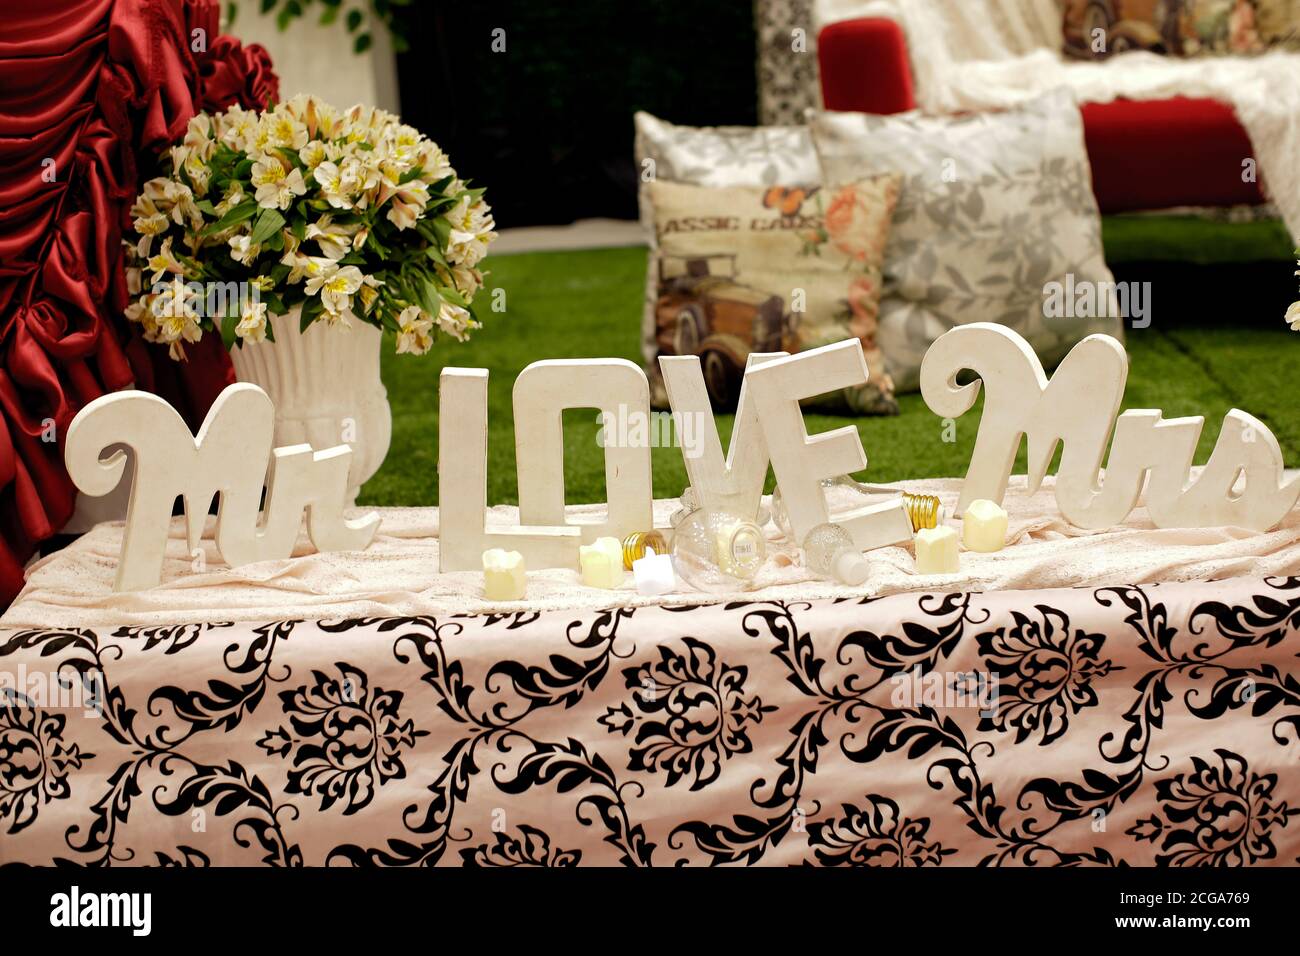 Indoors wedding reception venue with decor, selective focus on flowers Stock Photo